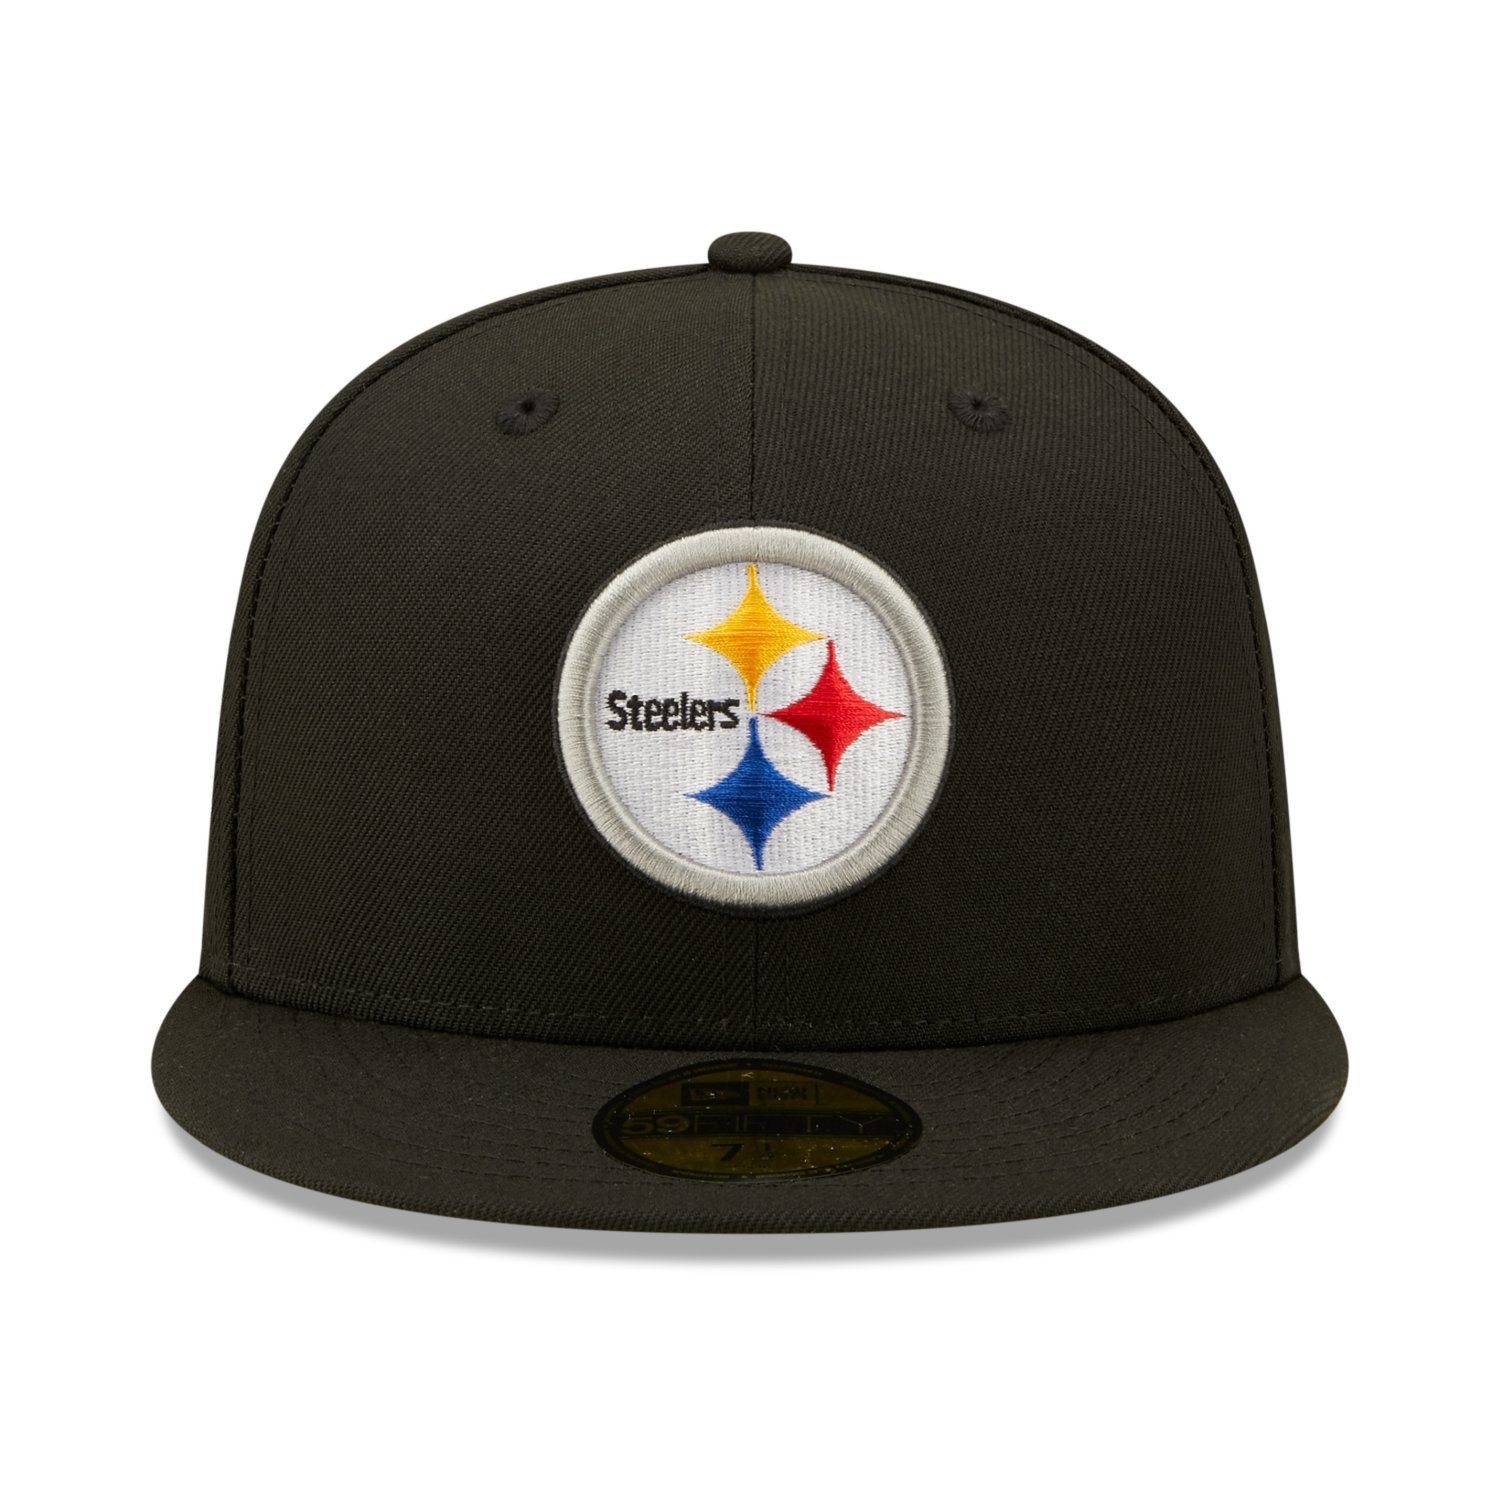 Seasons 80 New Steelers Cap 59Fifty Fitted Pittsburgh Era